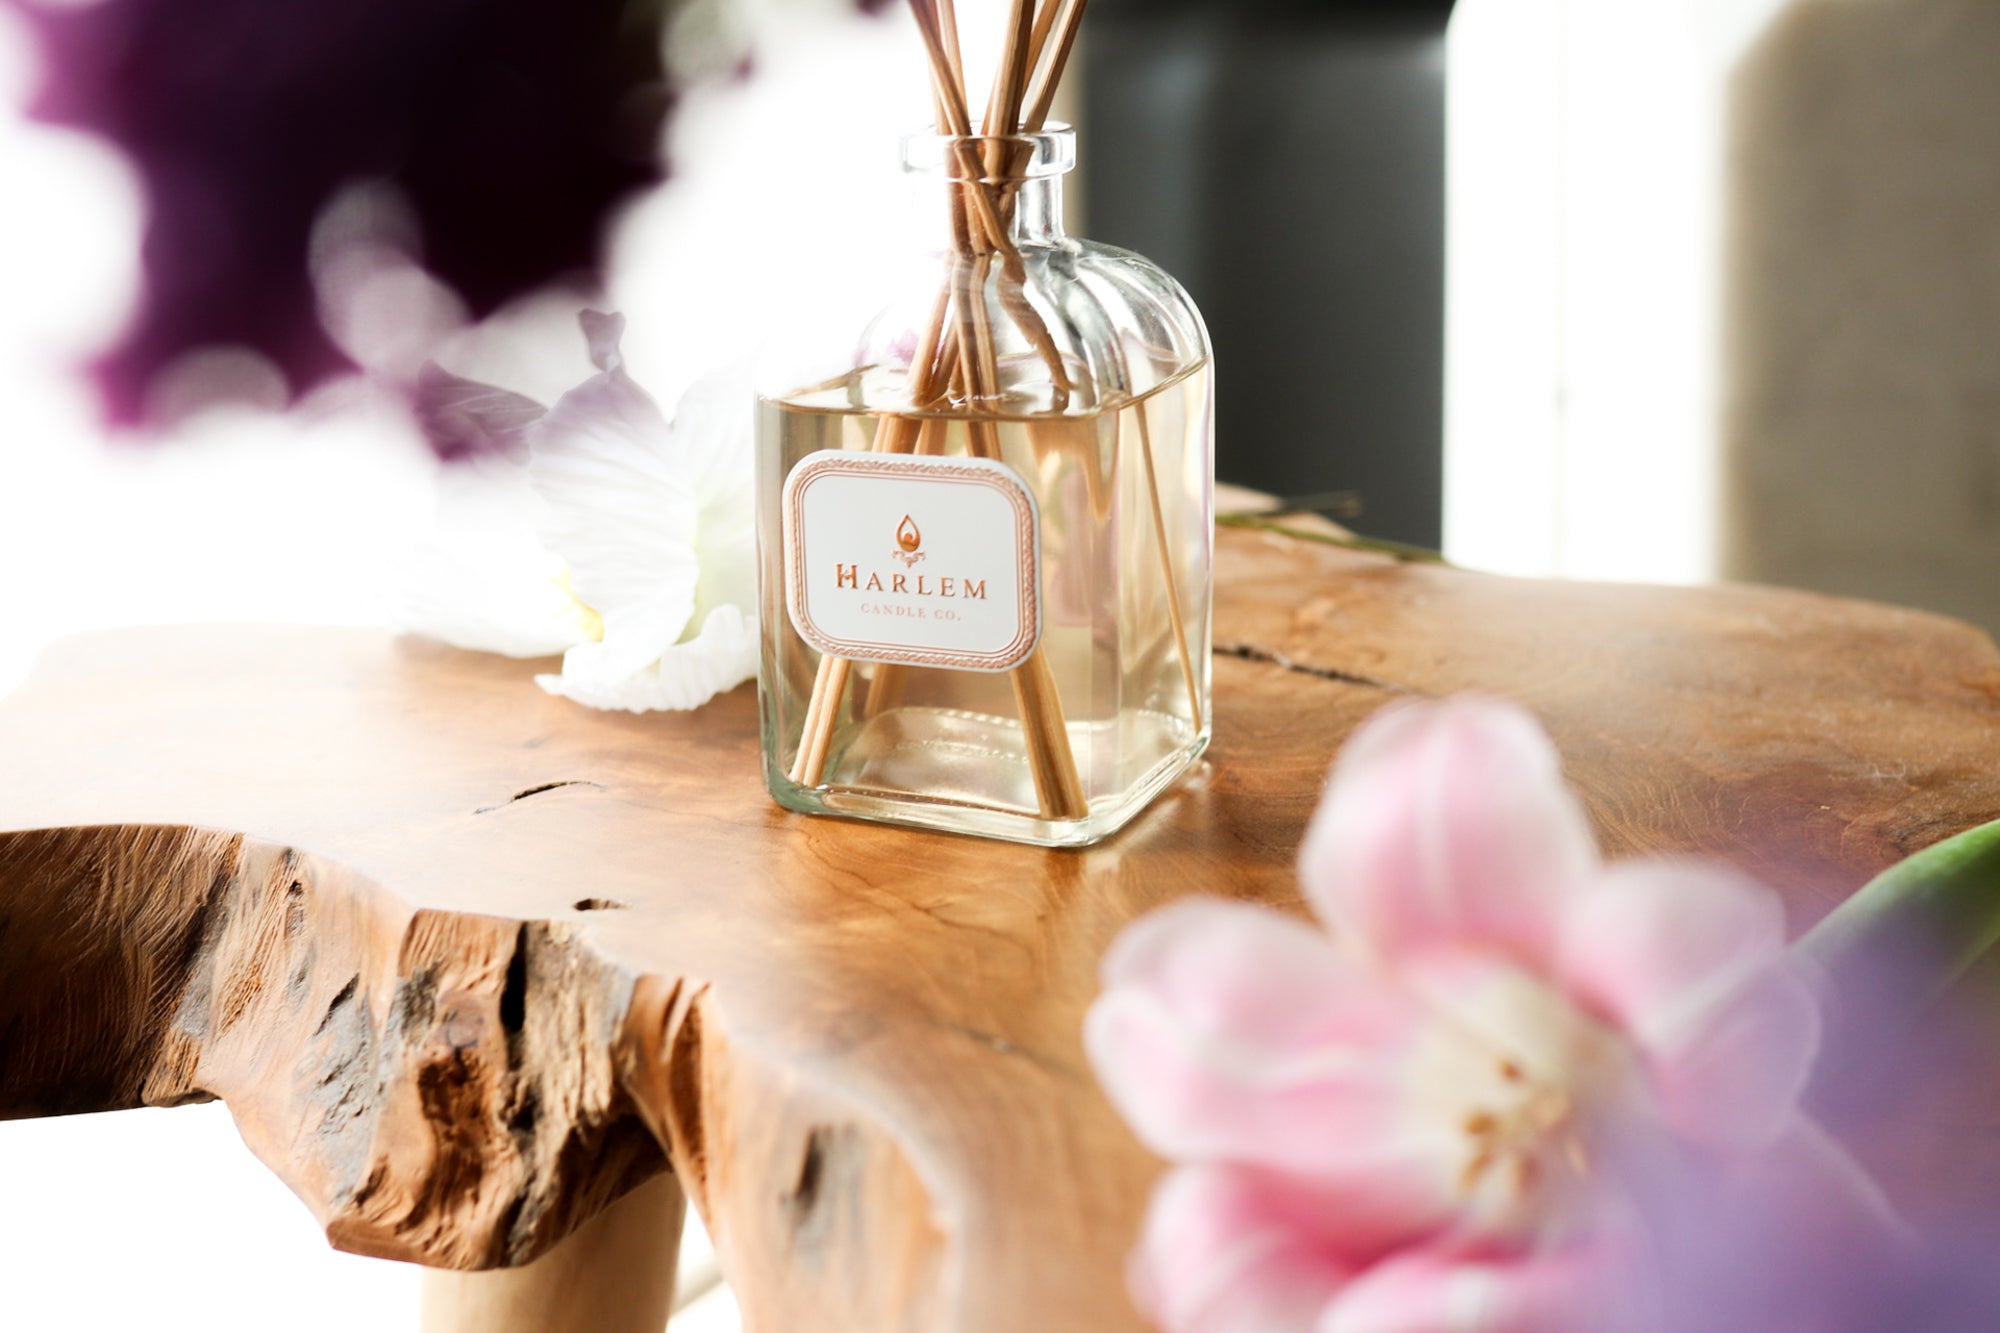 This is an image of our dream reed diffuser in a life style setting with the flowers surrounding it. It is on a wooden surface with a white and gold metallic label on the clear bottle.